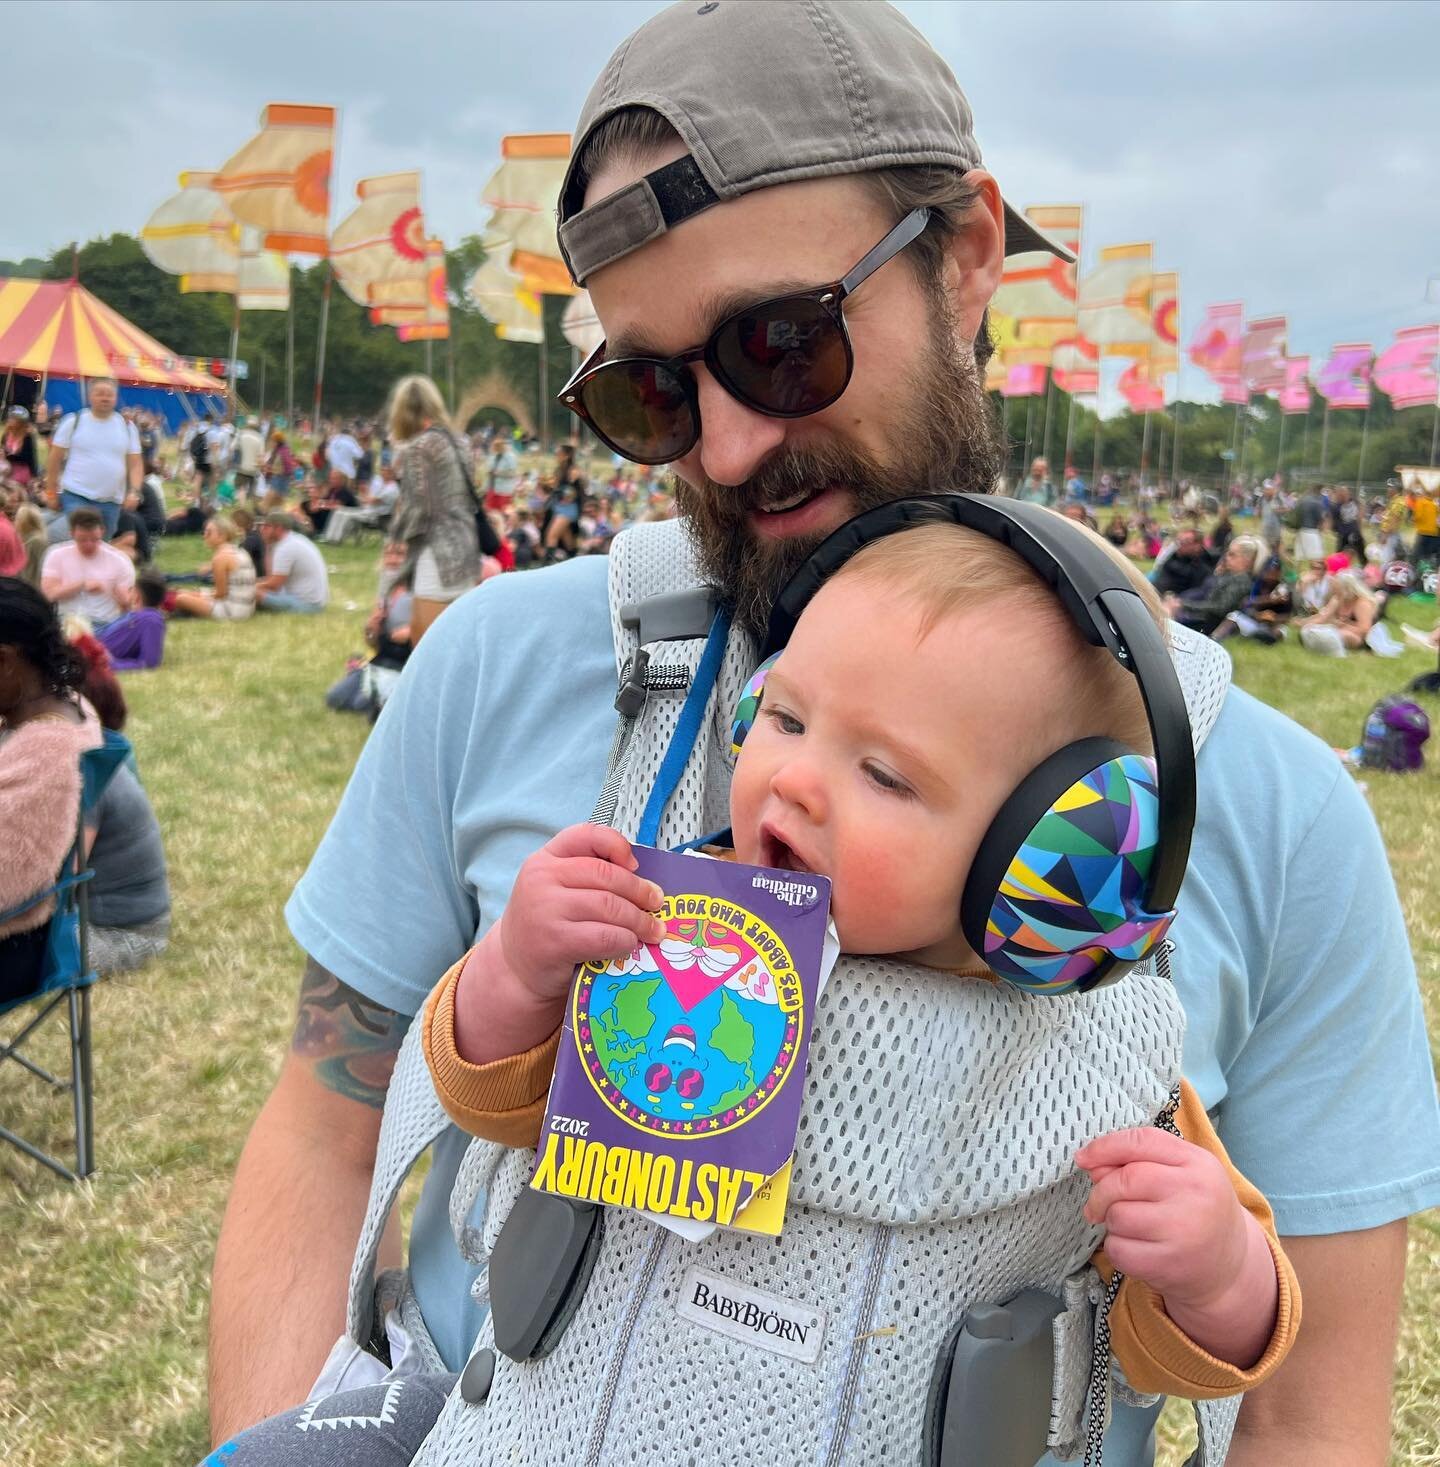 Finns first festival. He loves Glastonbury so much he just has to eat it!
#glastonbury